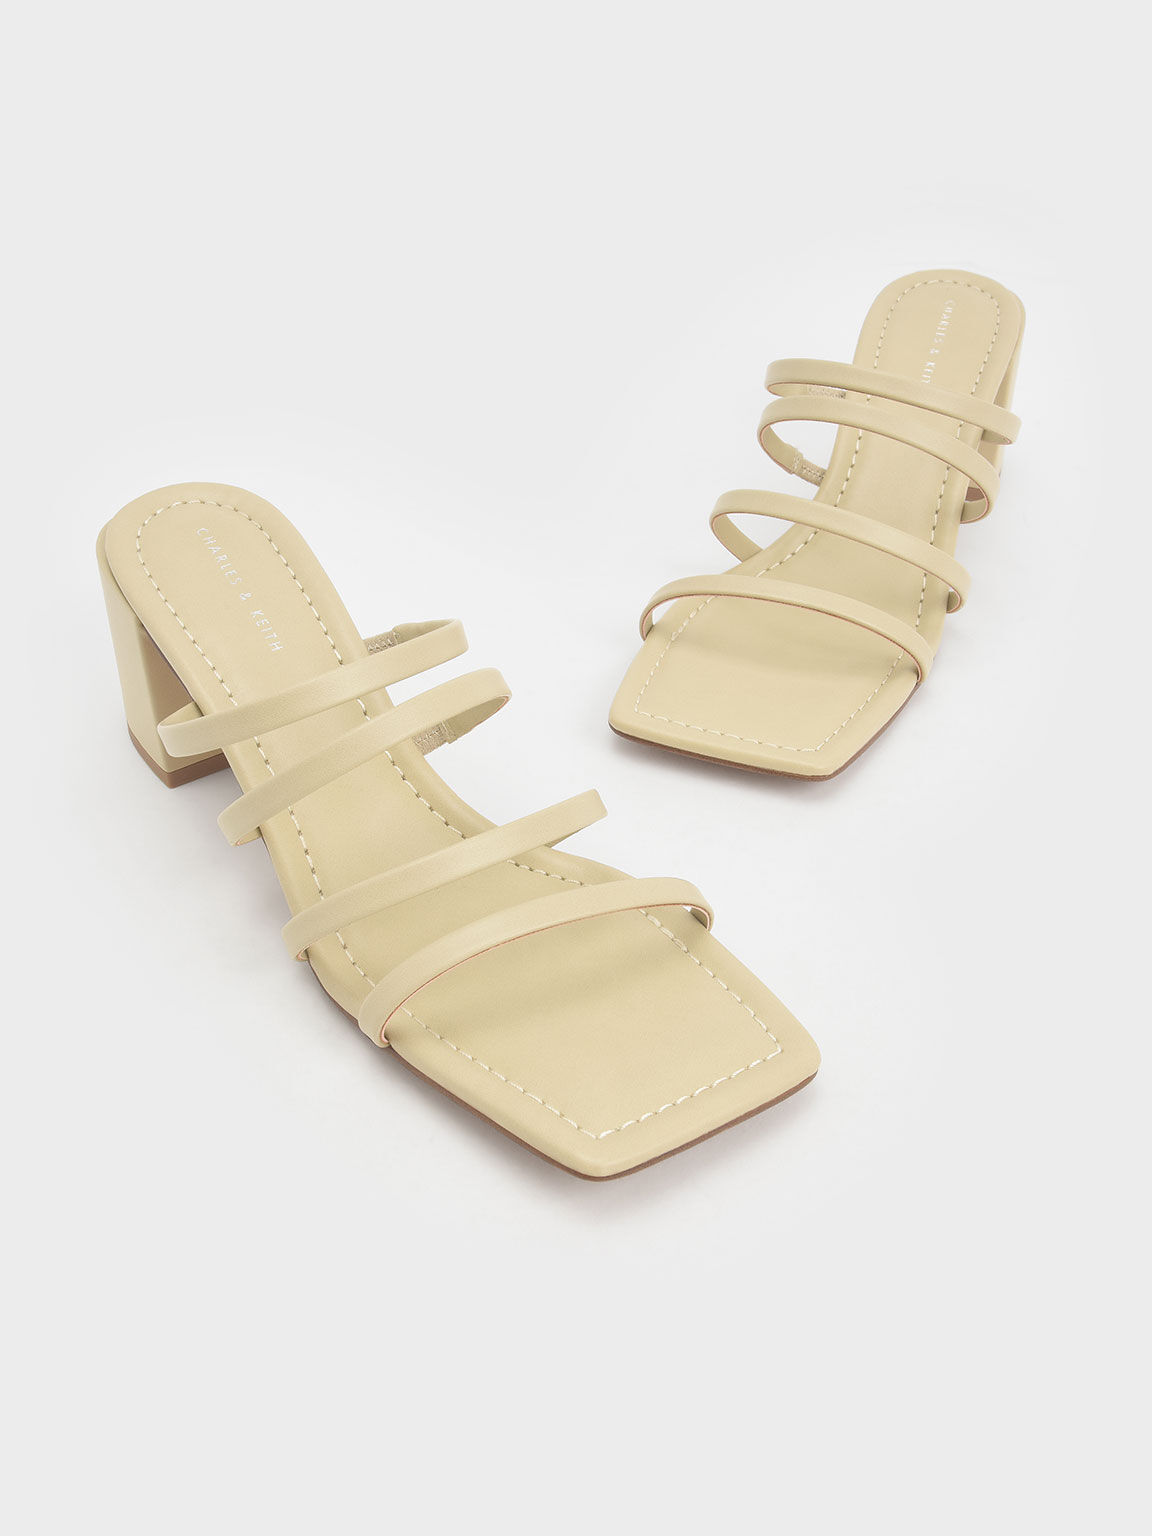 Sandal Mules Heeled Strappy Square-Toe, Sand, hi-res